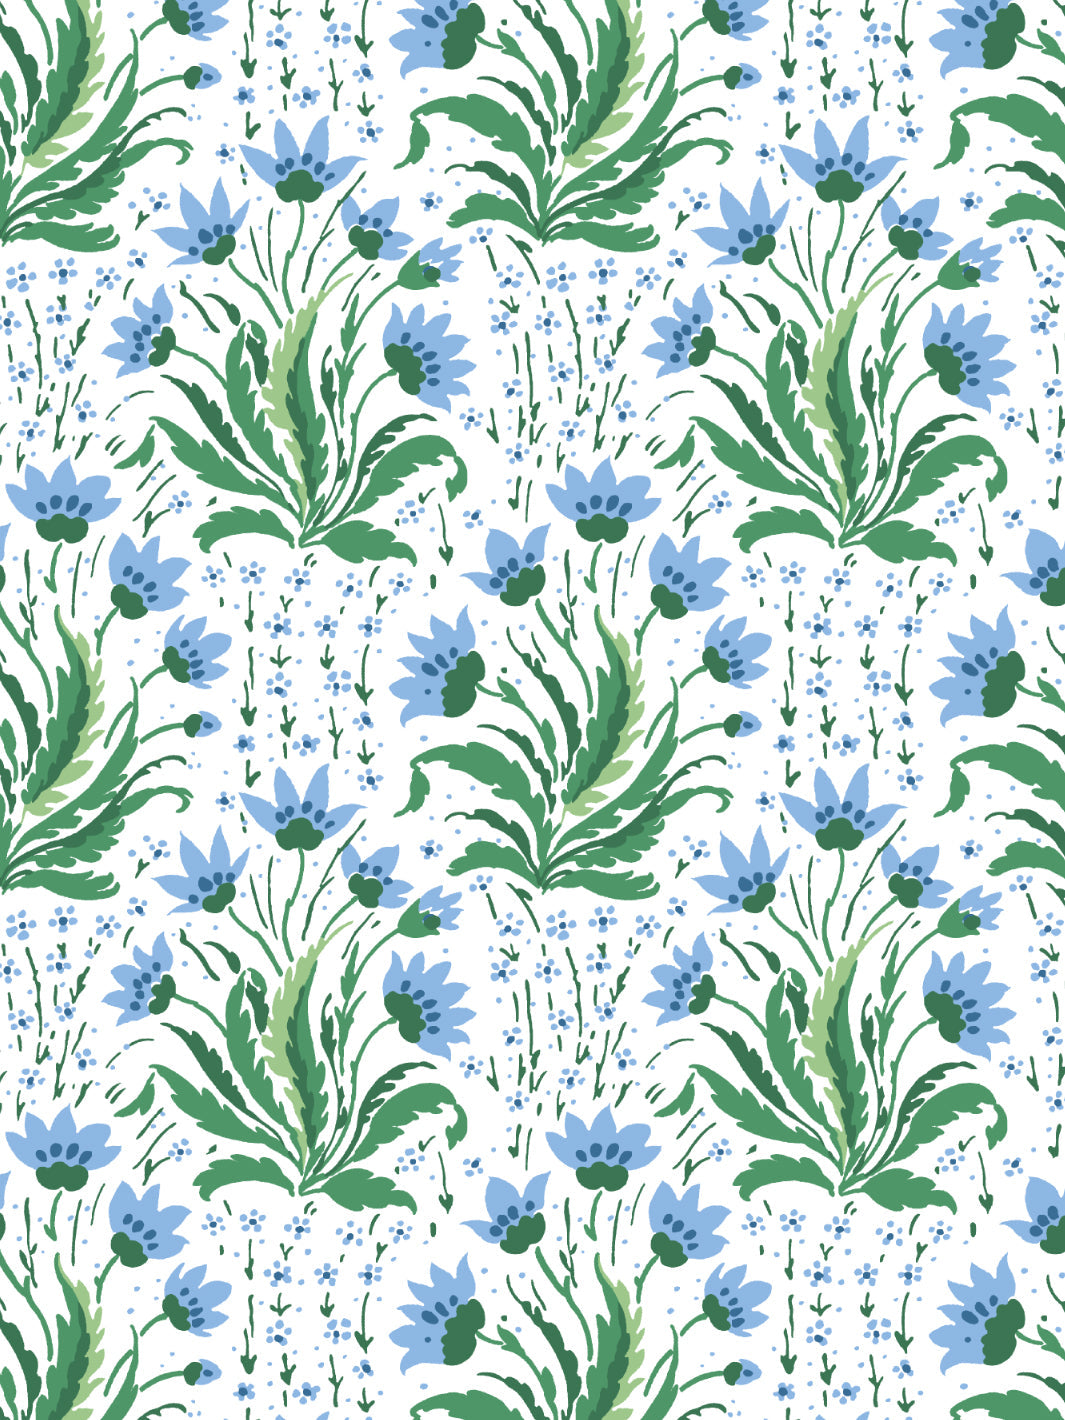 'Hillhouse Floral Multi' Wallpaper by Nathan Turner - Blue Green